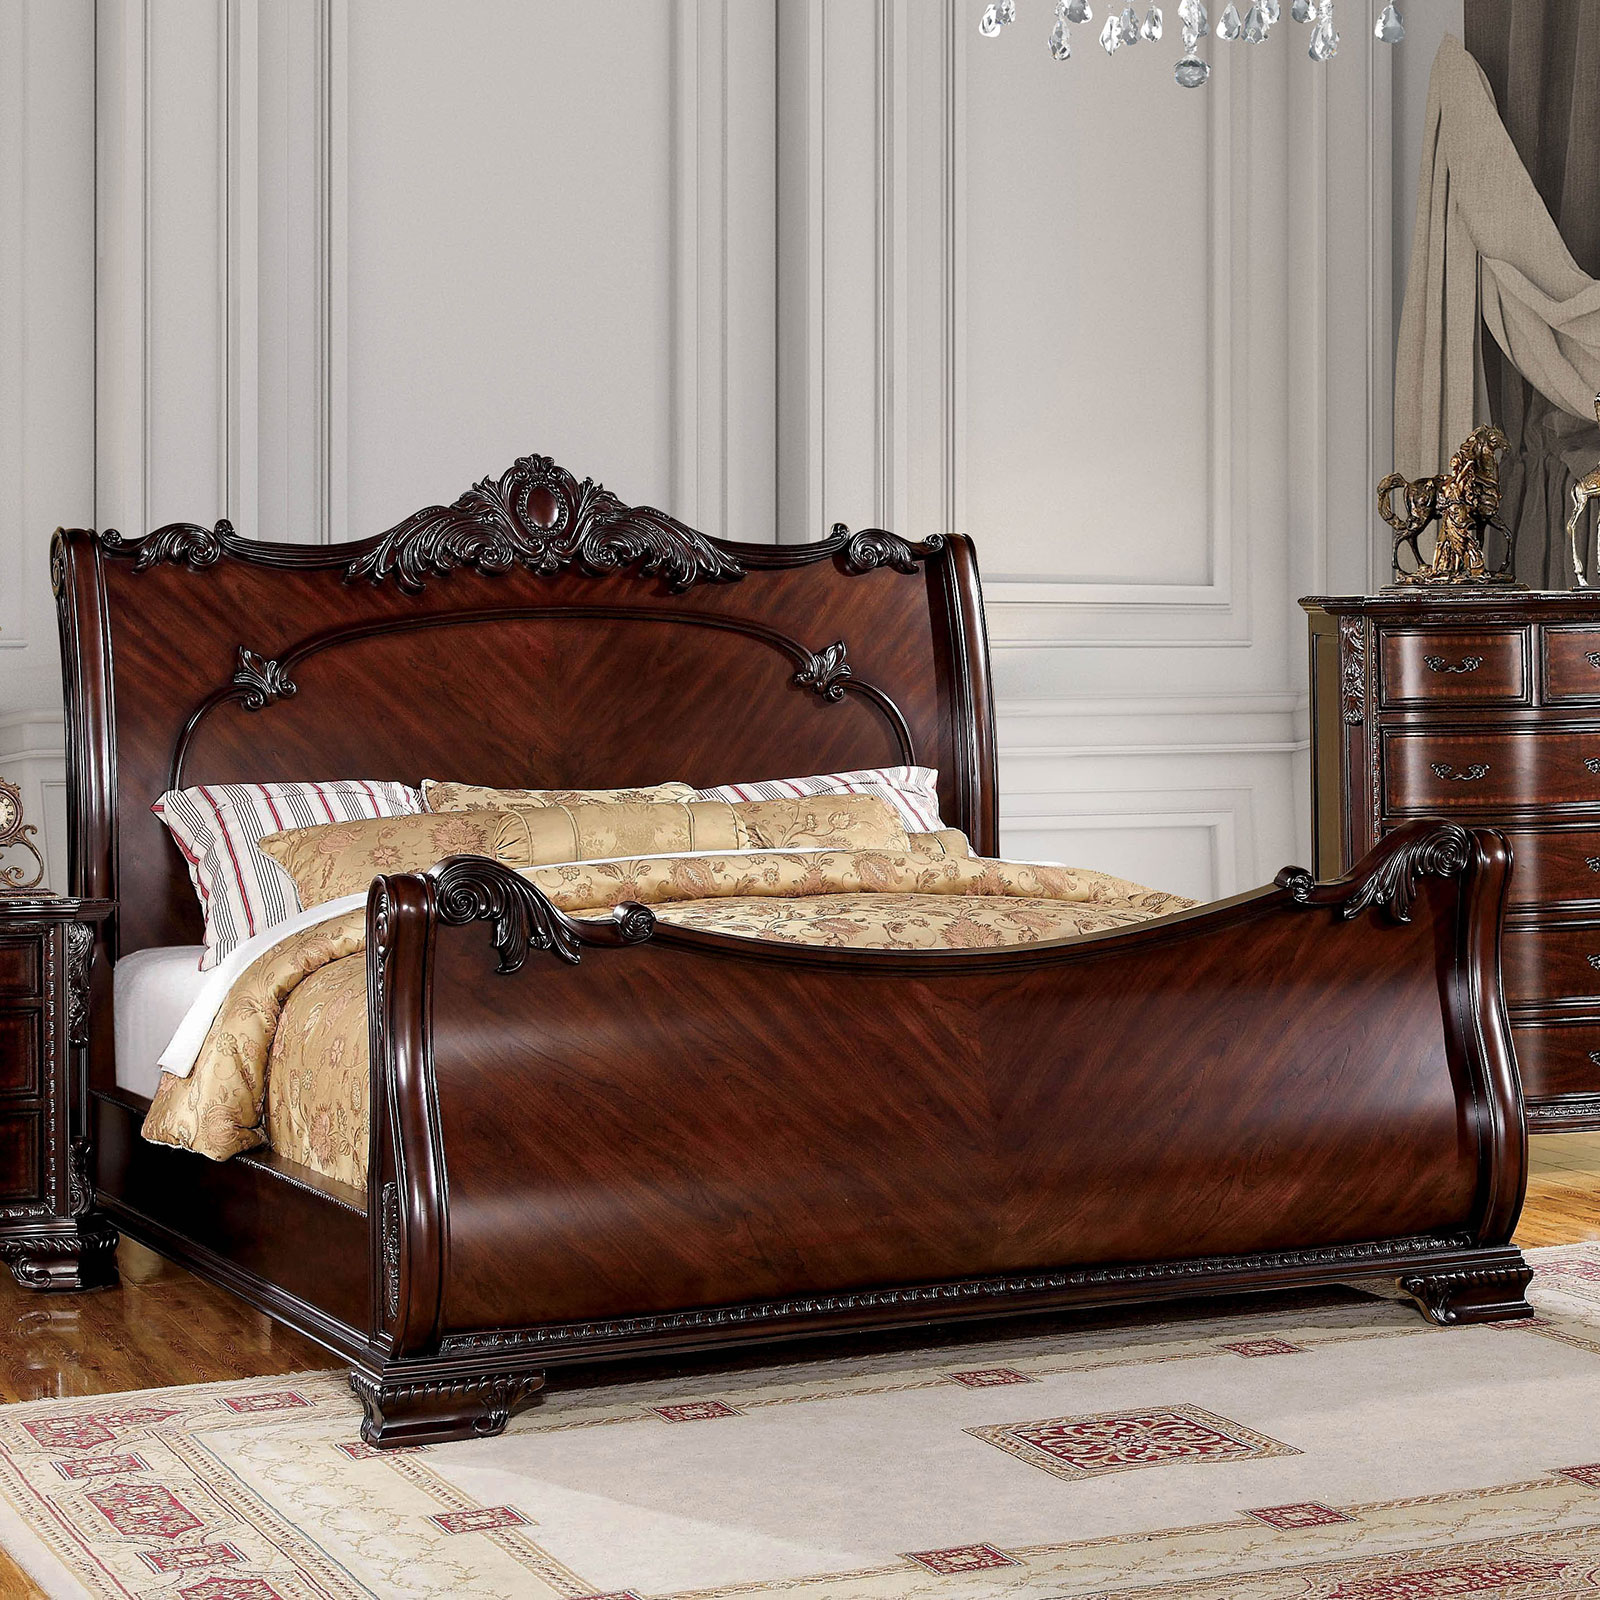 Formal Traditional Elegant Carved Sleigh Bed Brown Cherry Solid wood Queen Size Bed Bedroom Furniture 1pc Bed Intricate Carving - image 1 of 5